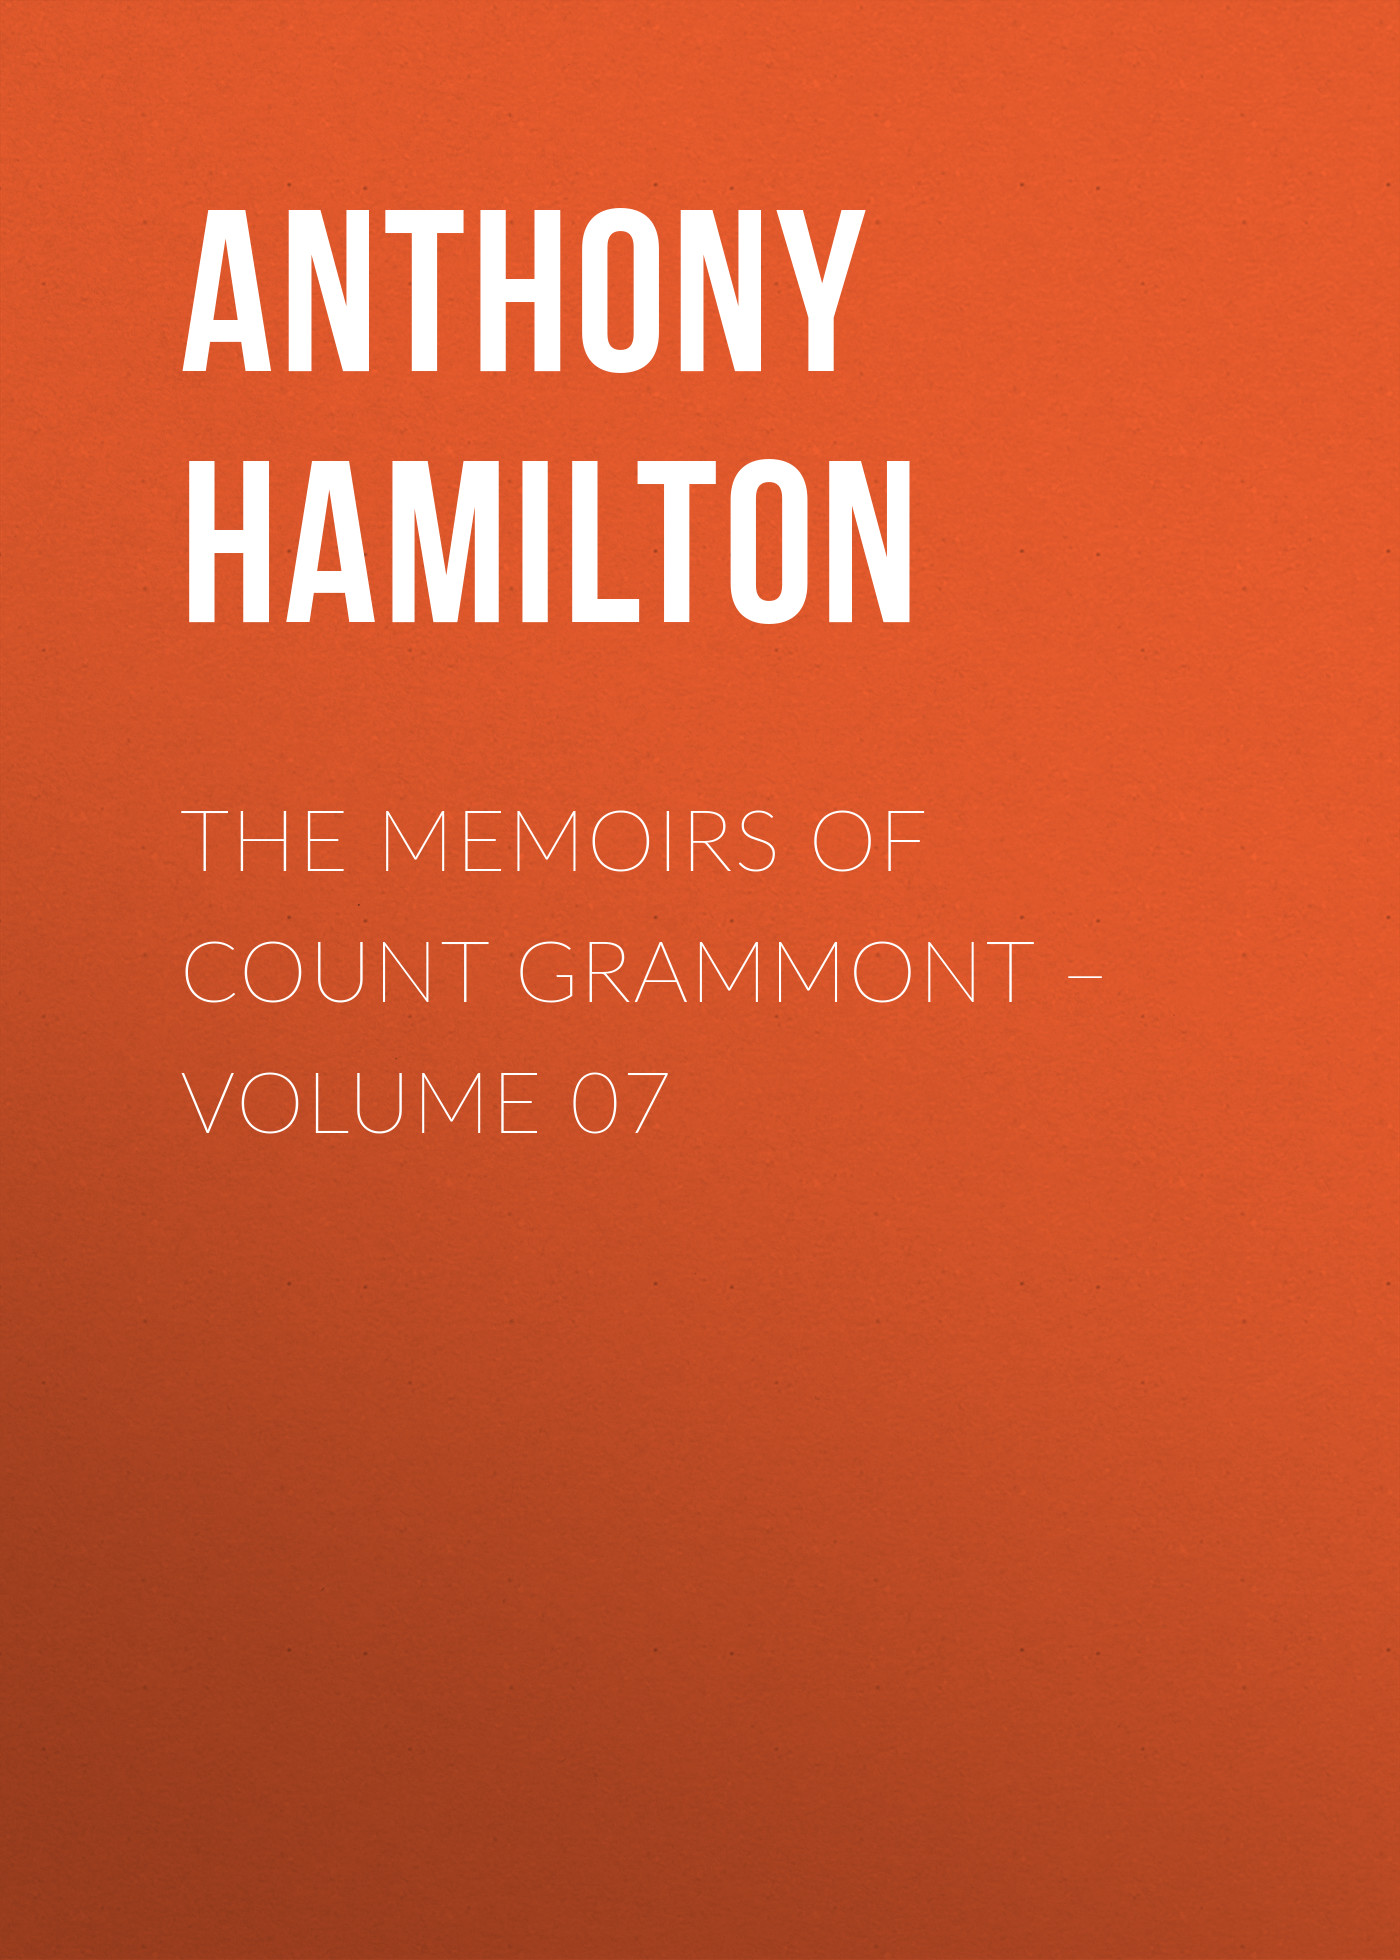 The Memoirs of Count Grammont– Volume 07